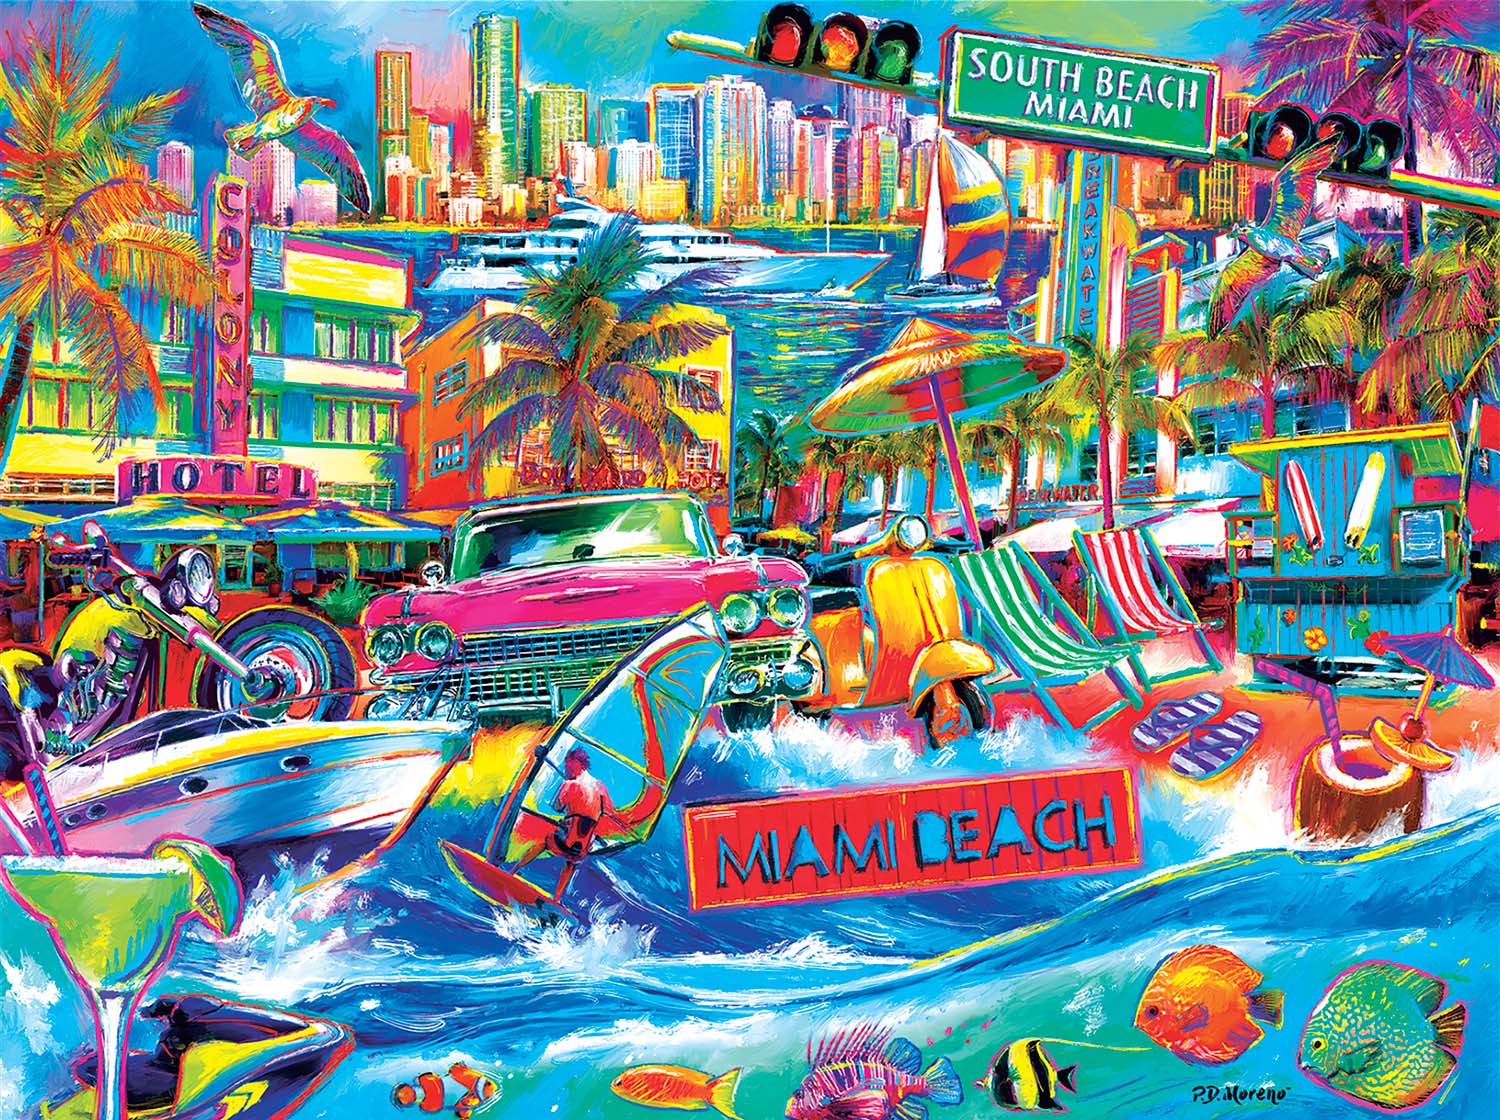 I Heart South Beach, 300 Pieces, RoseArt